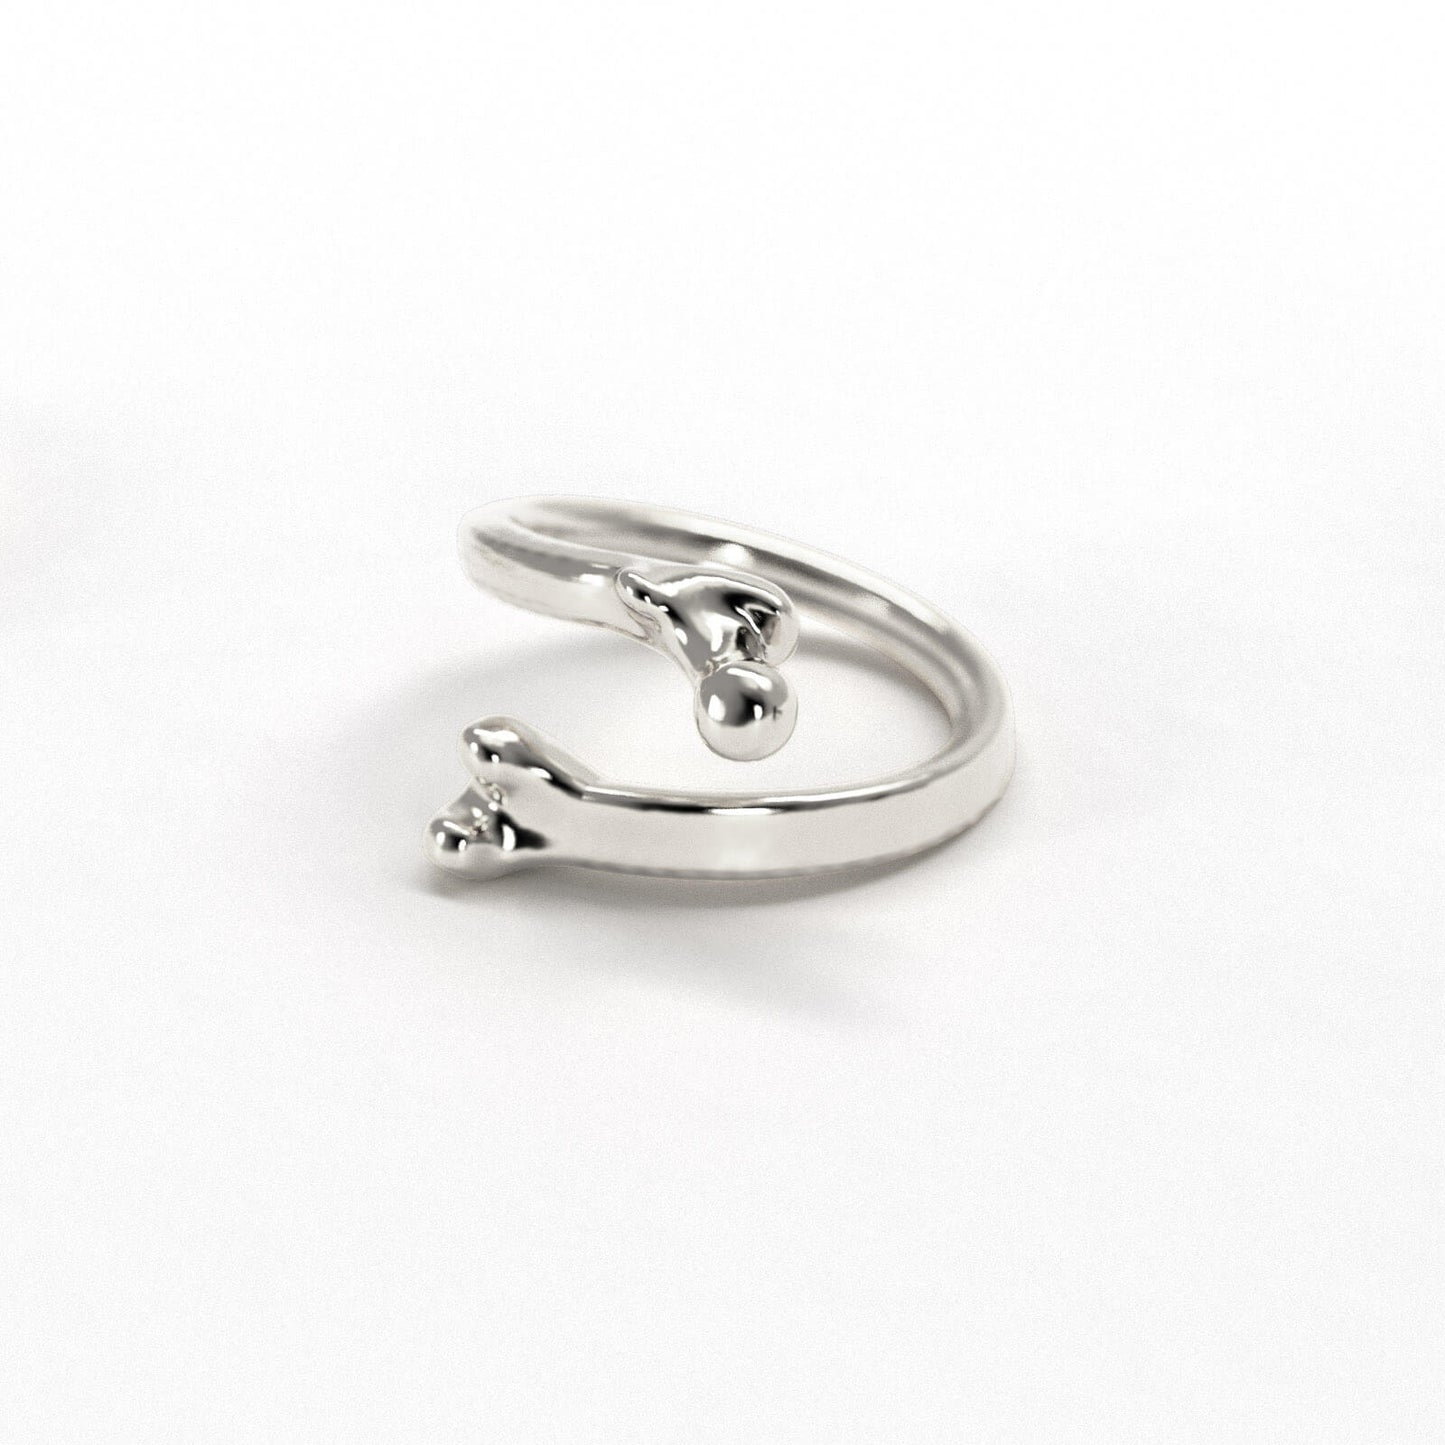 925 Silver Bone Ring - The ones that were not going to come out